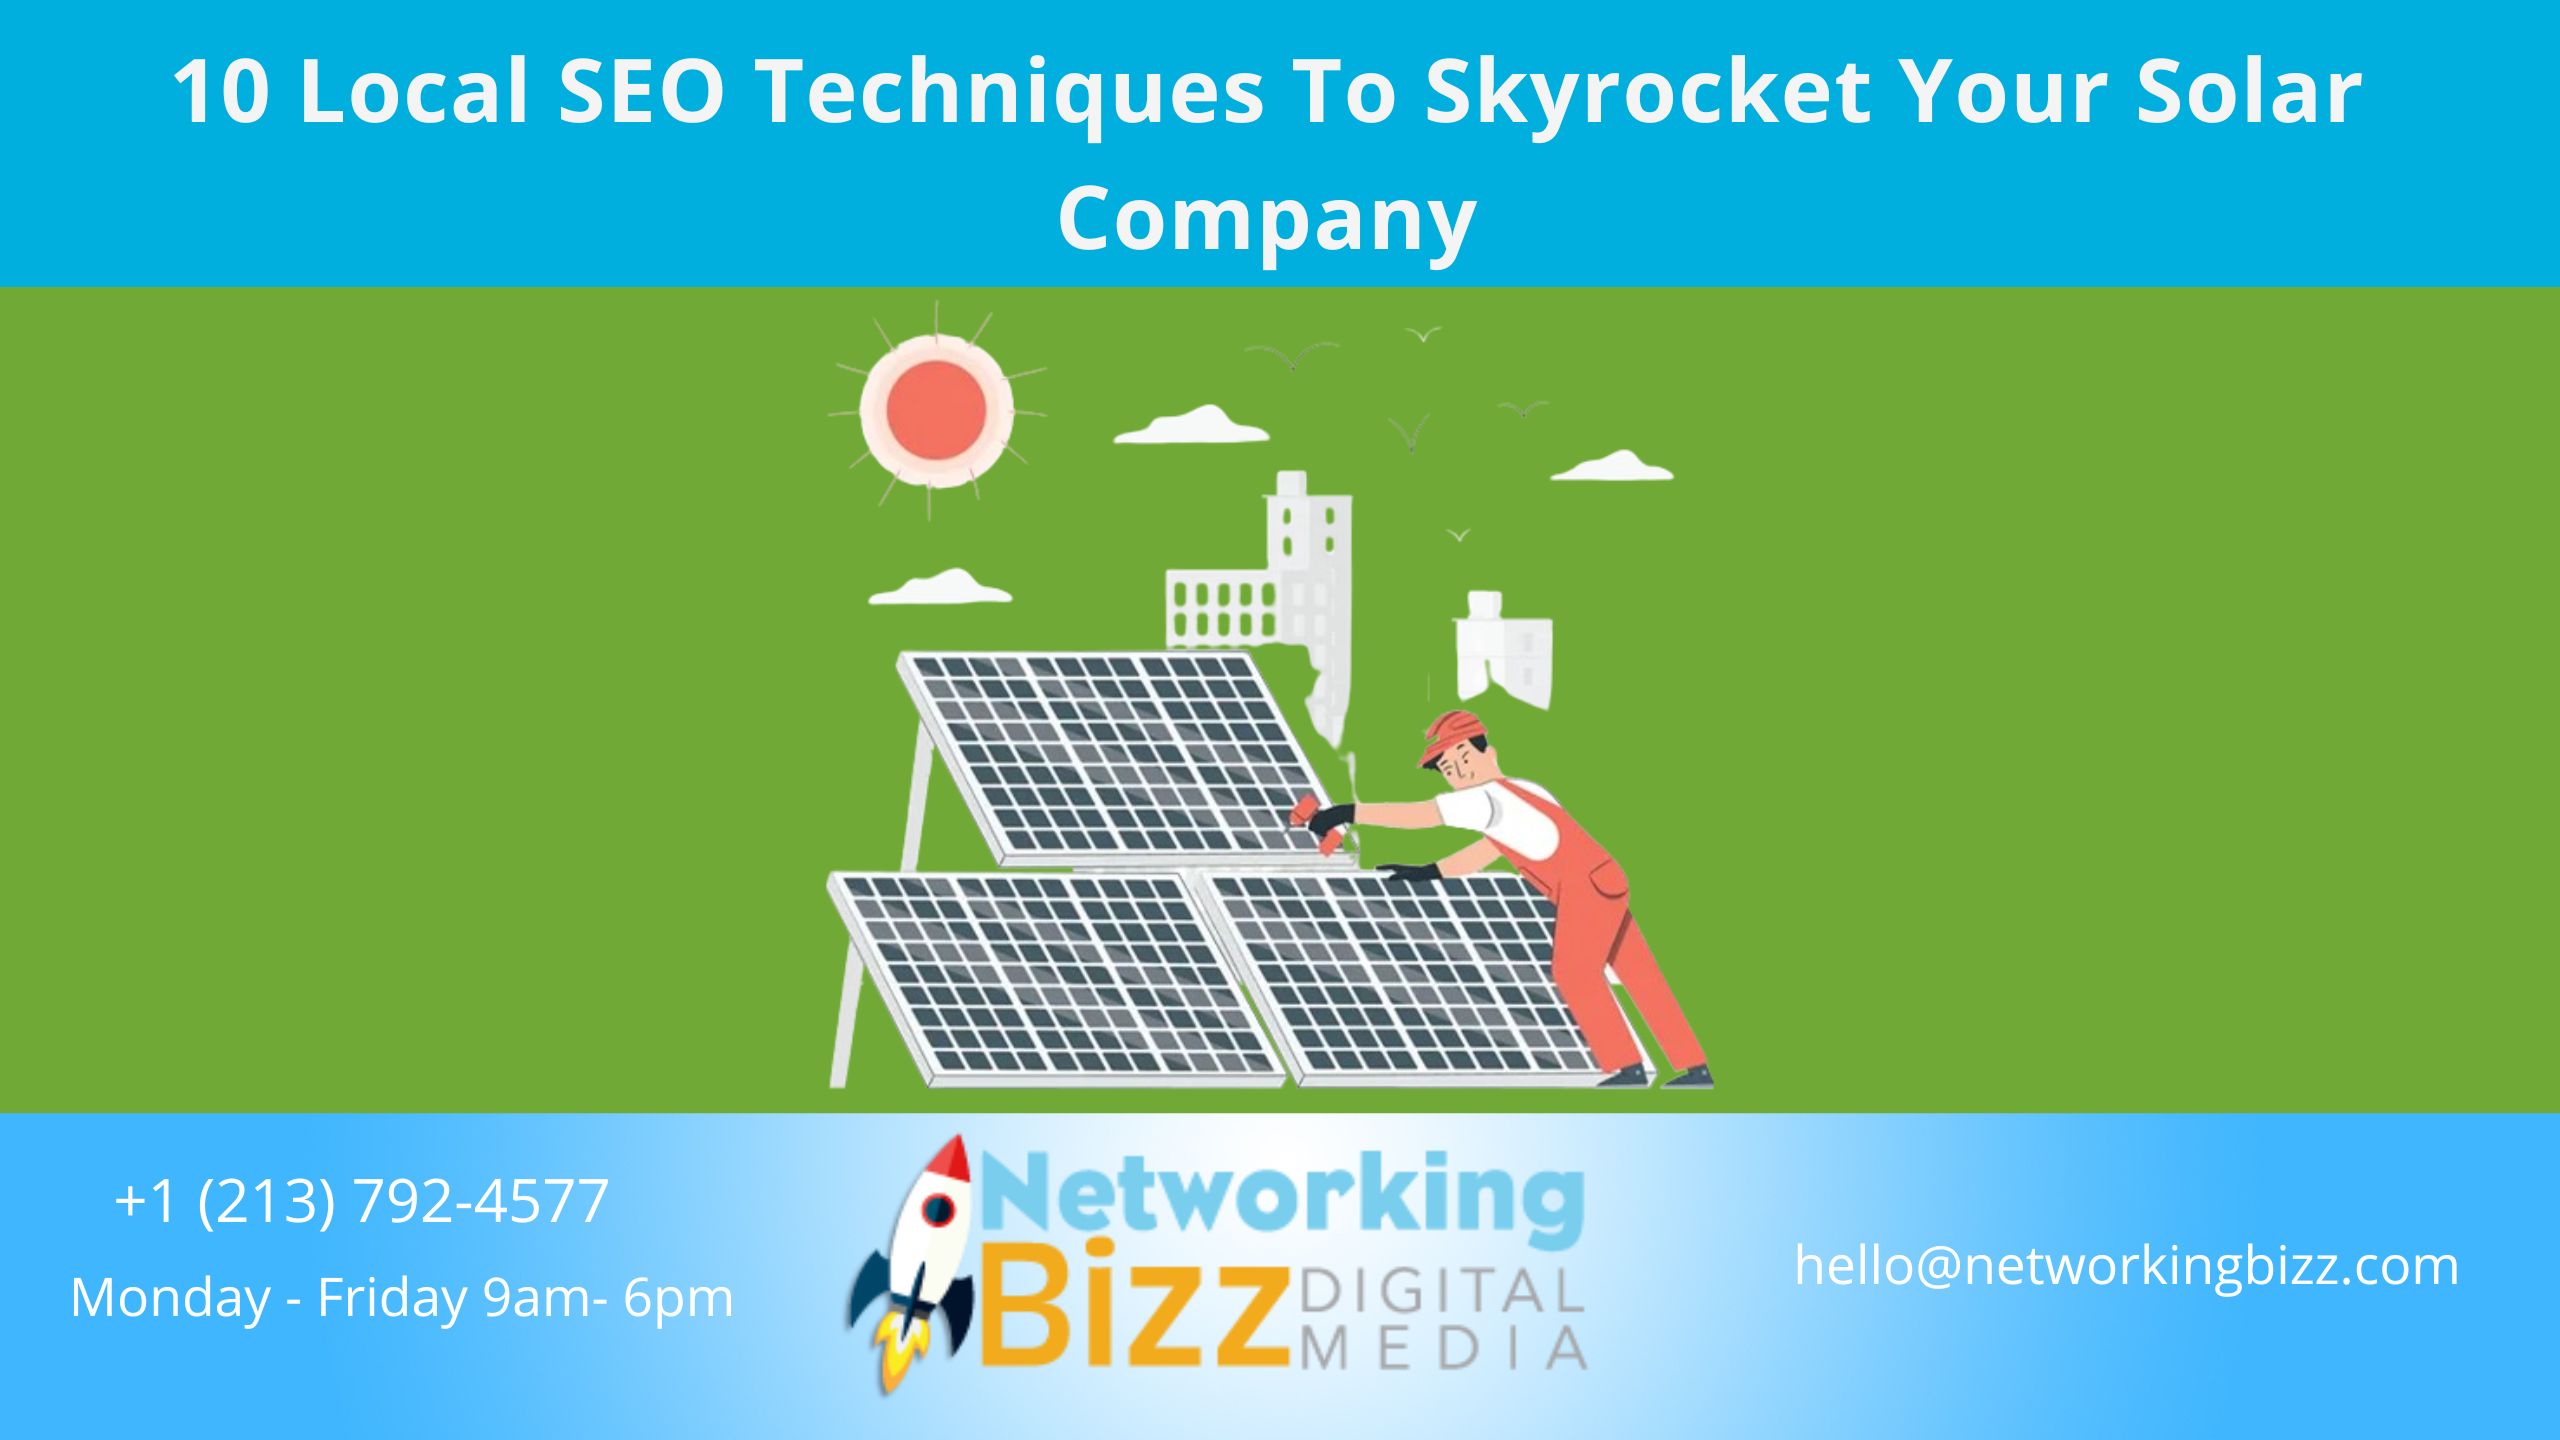 10 Local SEO Techniques To Skyrocket Your Solar Company